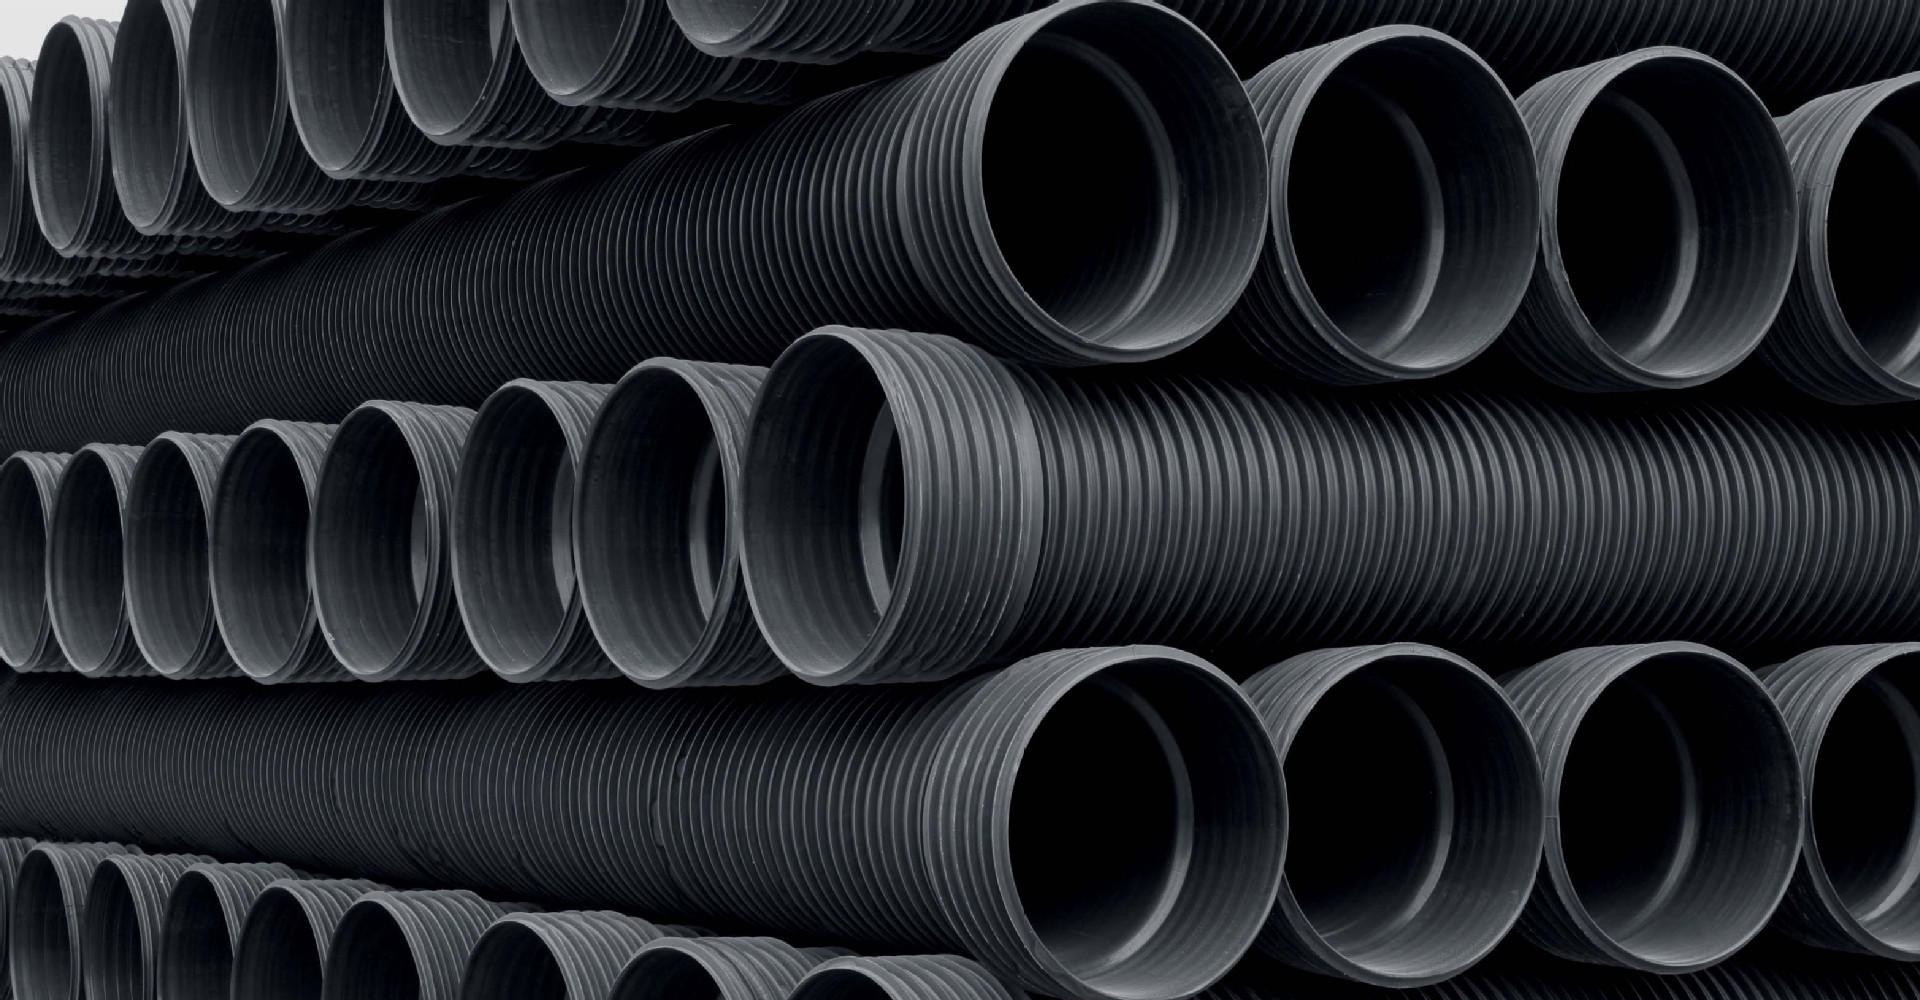 Characteristics of FRPP pipes